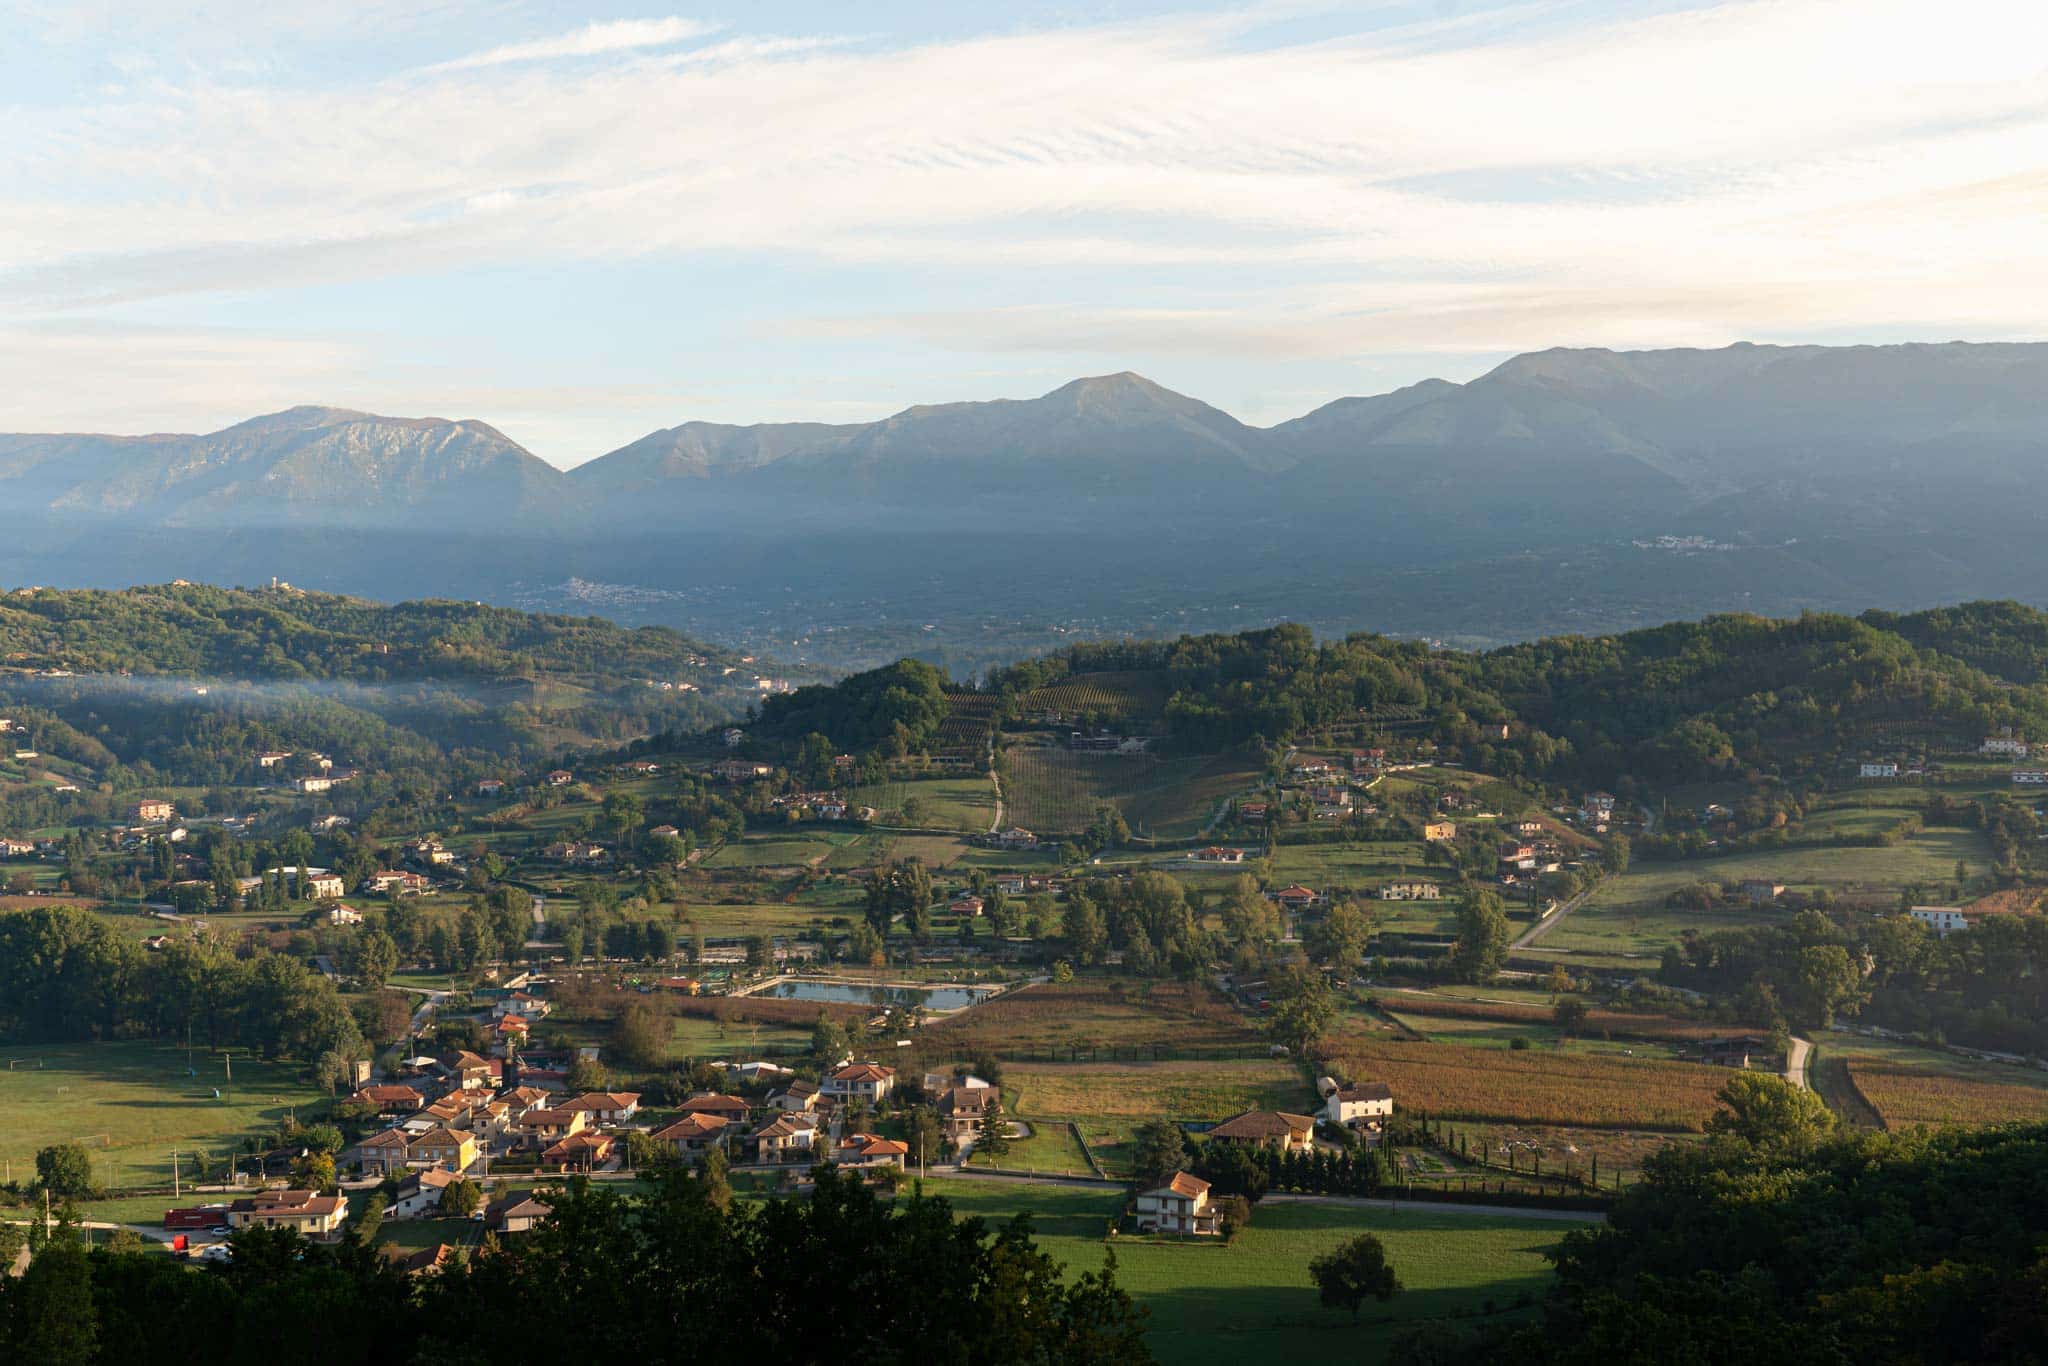 Overlooking the Camino Valley, one of the most naturally beautiful places to see near Rome